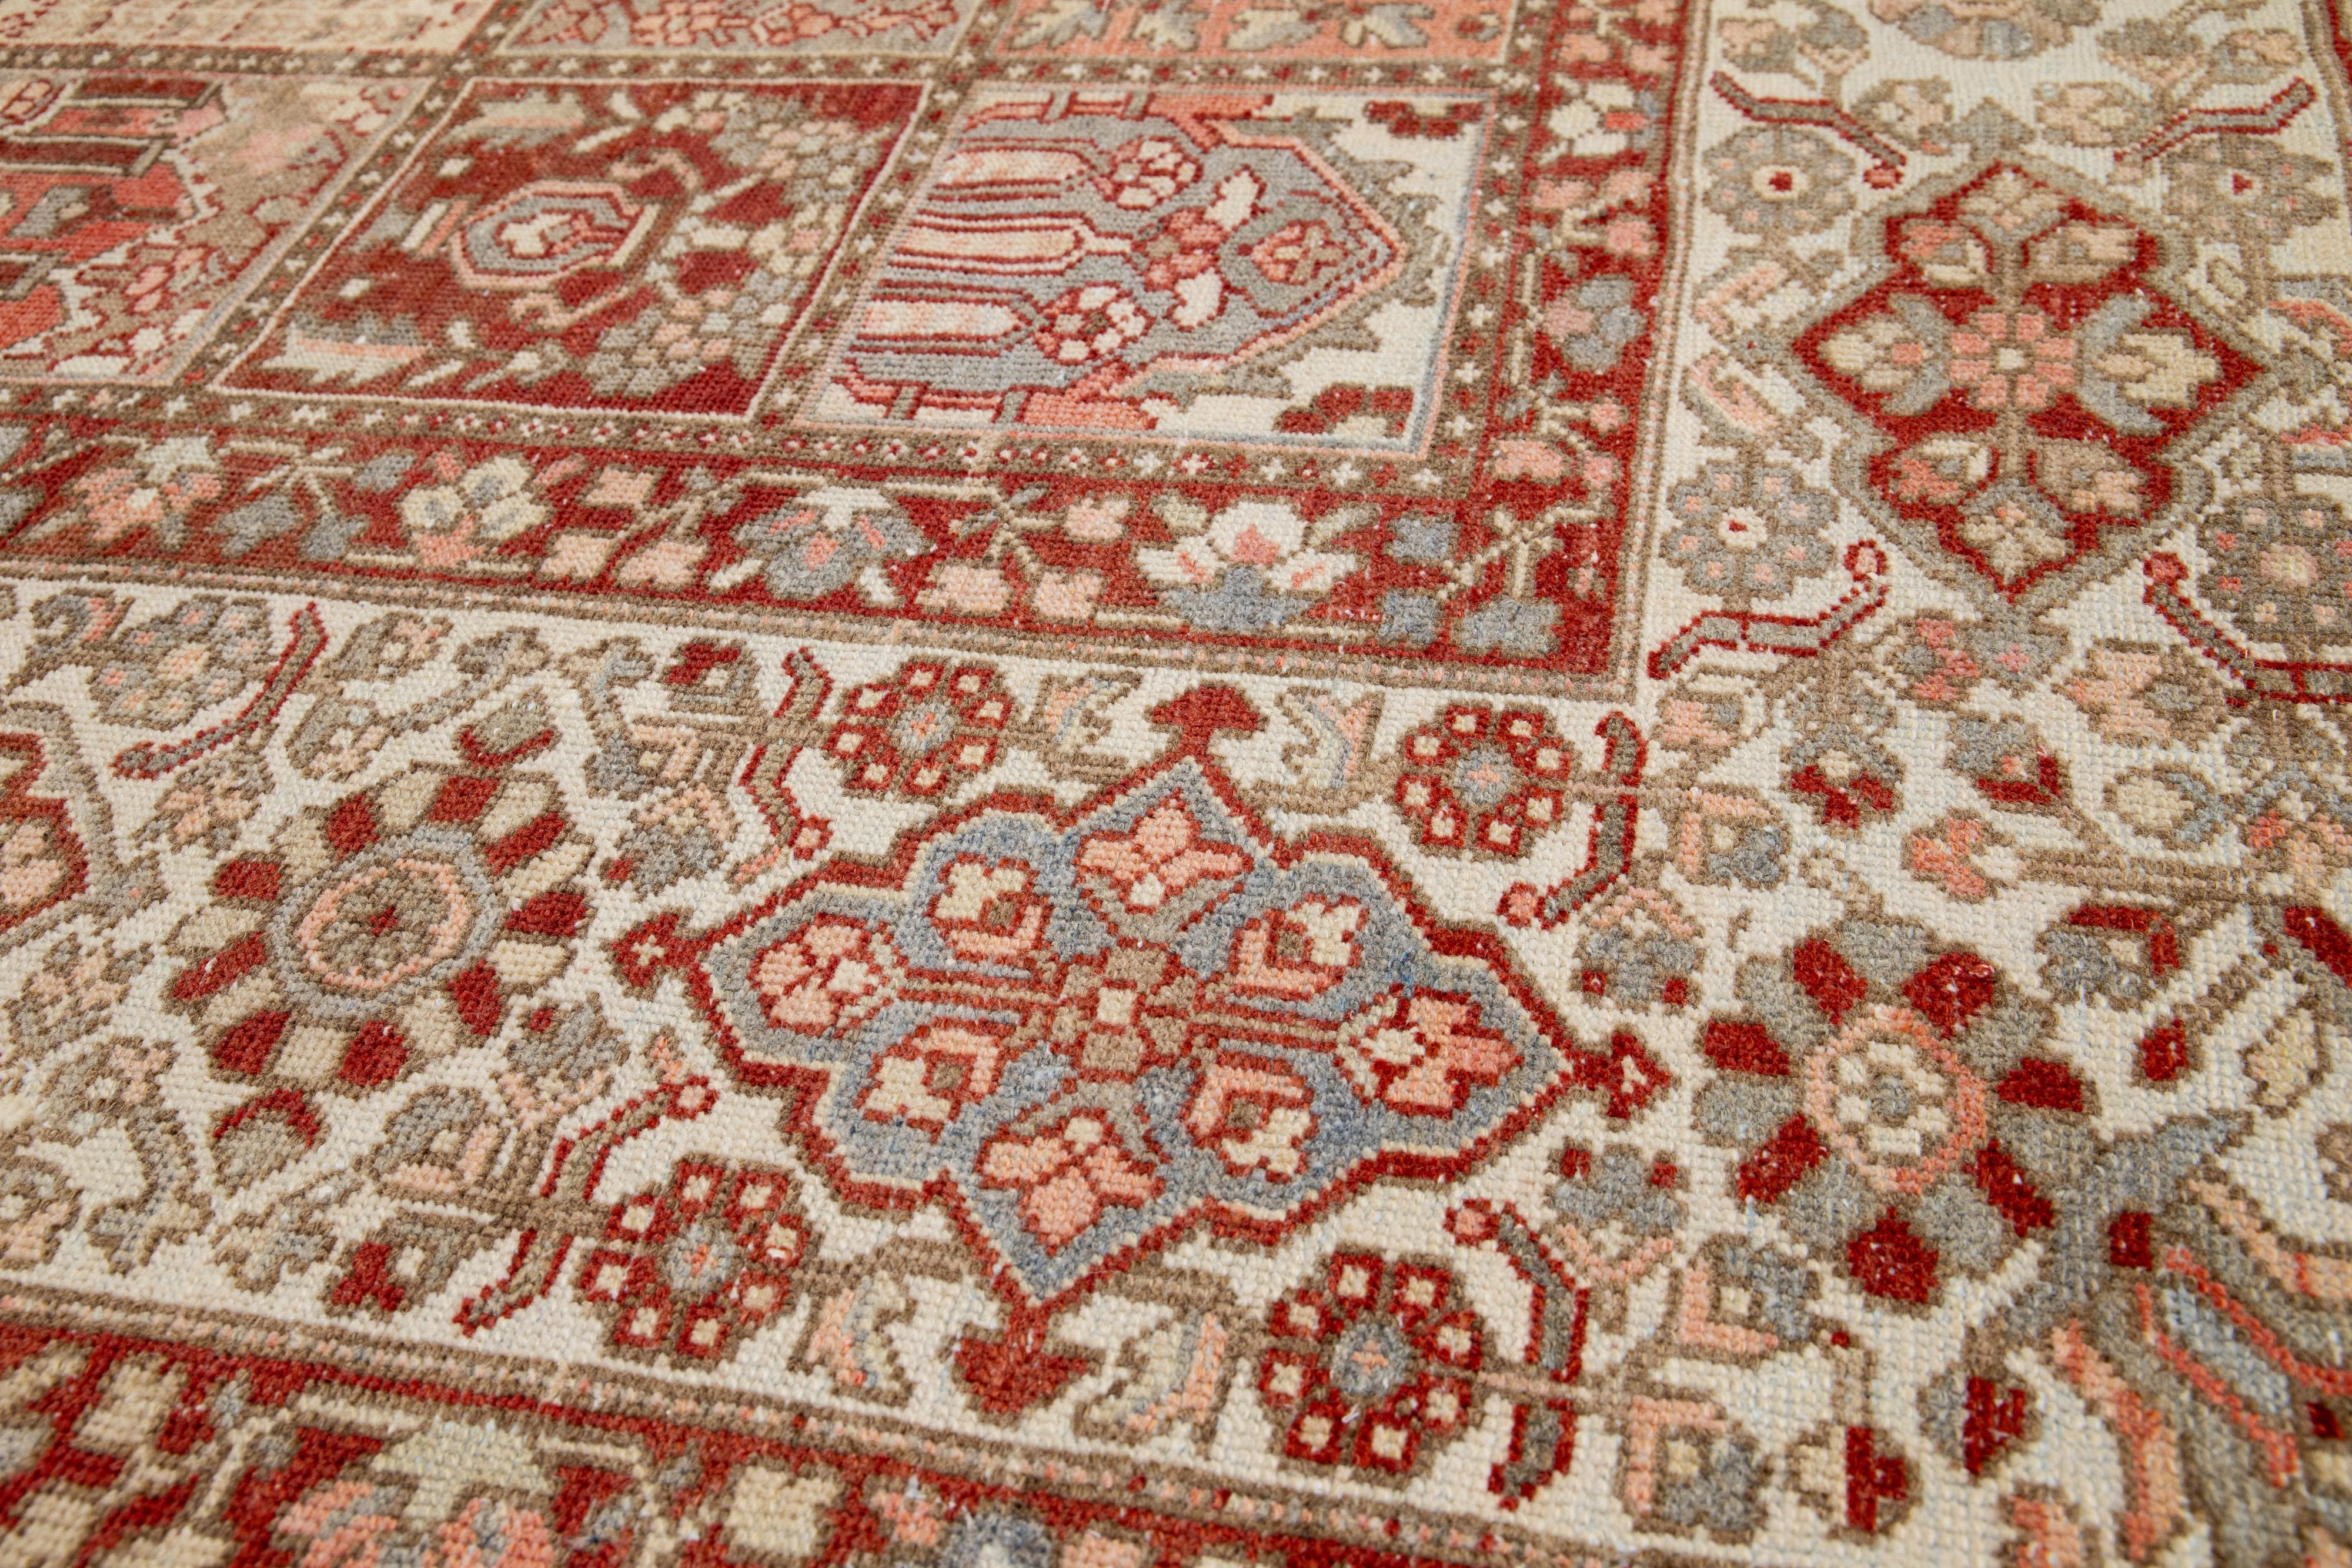 Islamic Multicolor Persian Bakhtiari Wool Rug Handcrafted in the 1920s For Sale